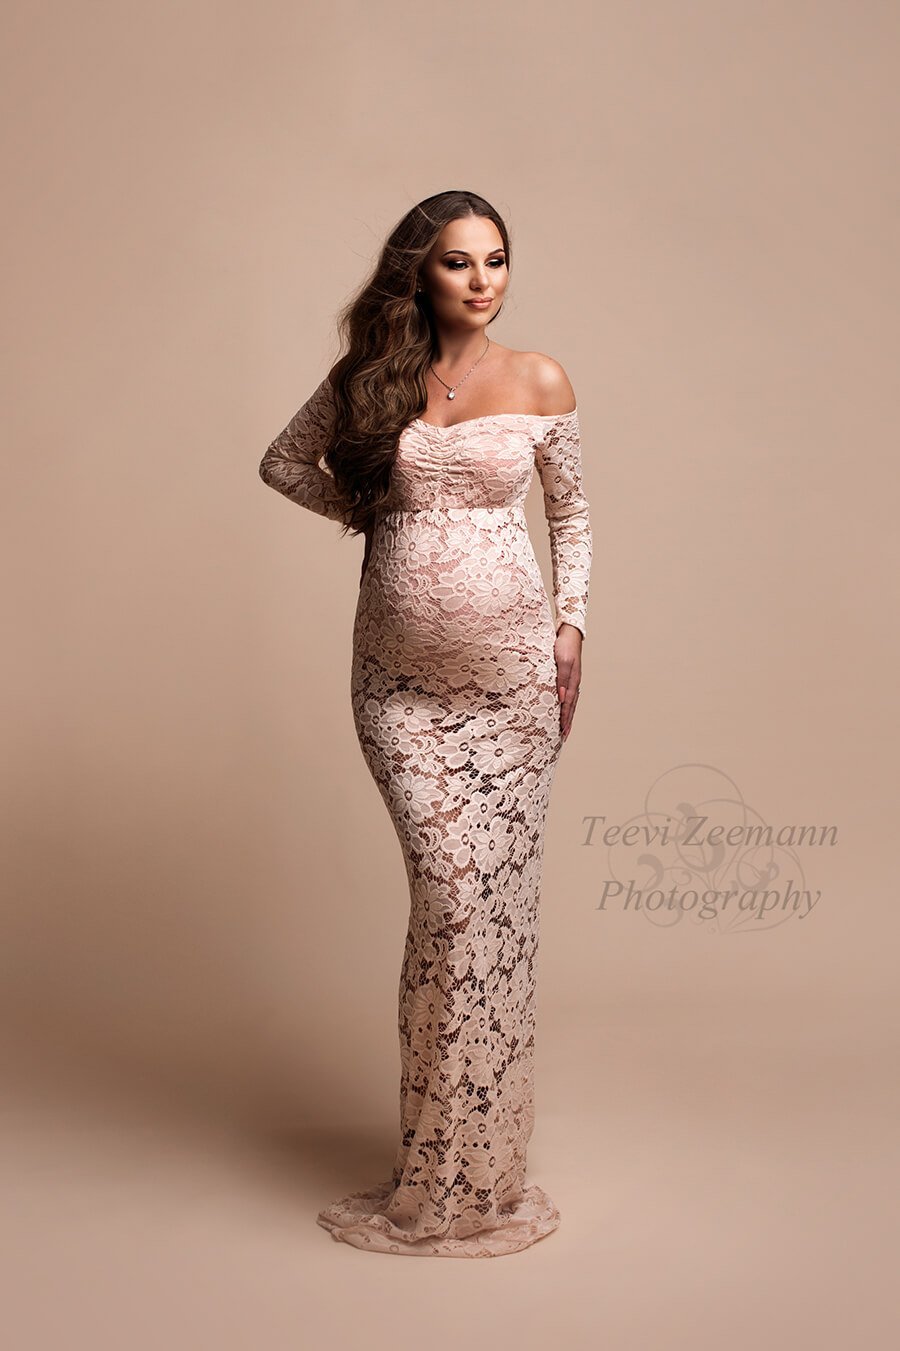 In the studio is the model wearing a long dress made out of lace. The dress is see trough at the skirt. She is pregnant